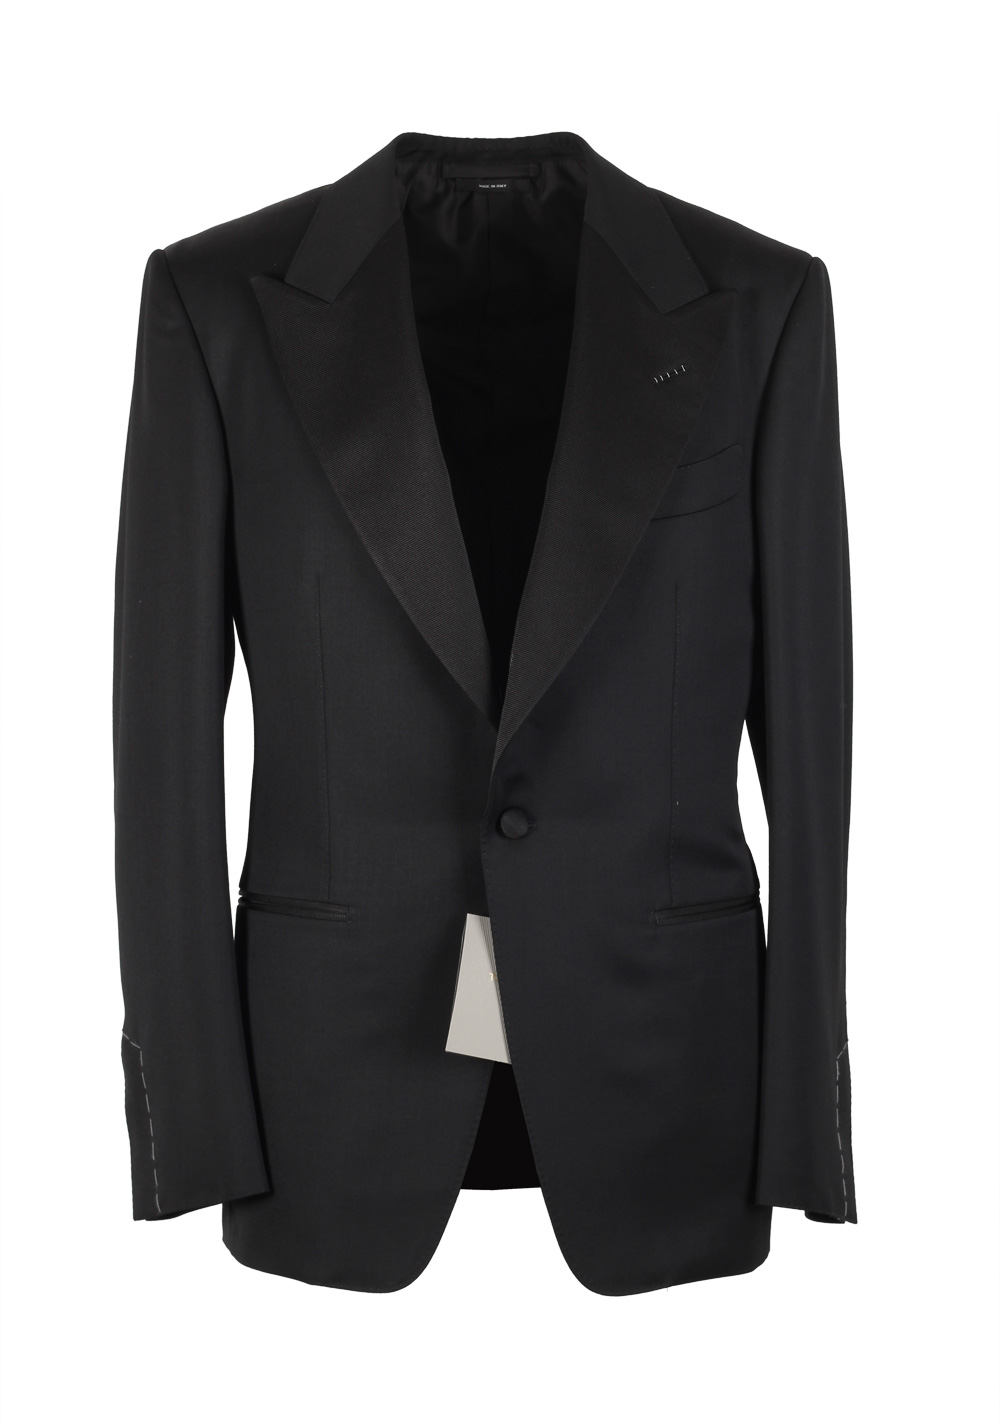 TOM FORD Windsor Black Tuxedo Suit Smoking Size 48 / 38R U.S. Fit A ...